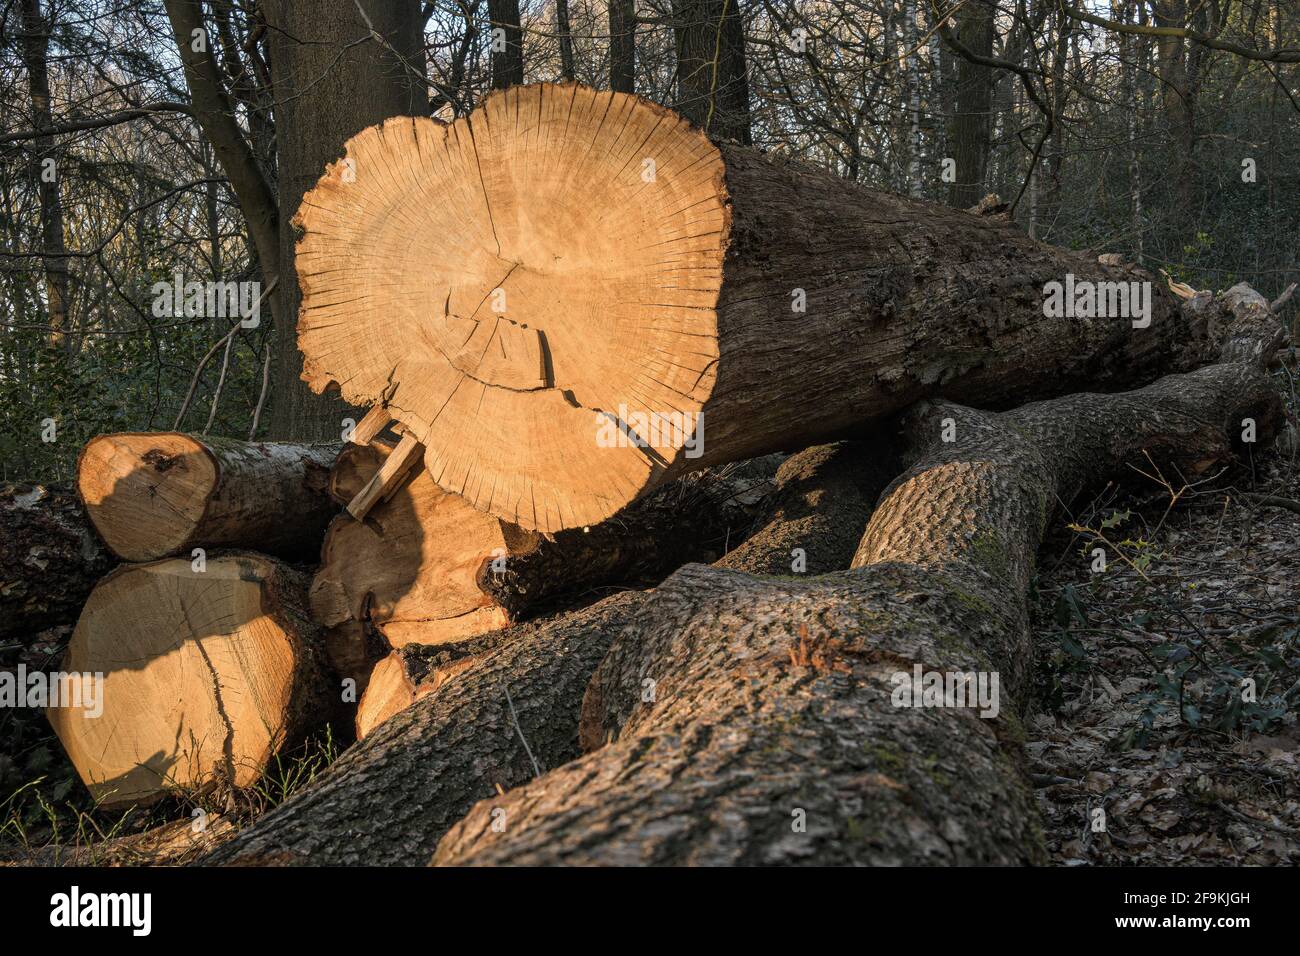 Logs of freshly cut trees of different species in a mixed forest Stock Photo